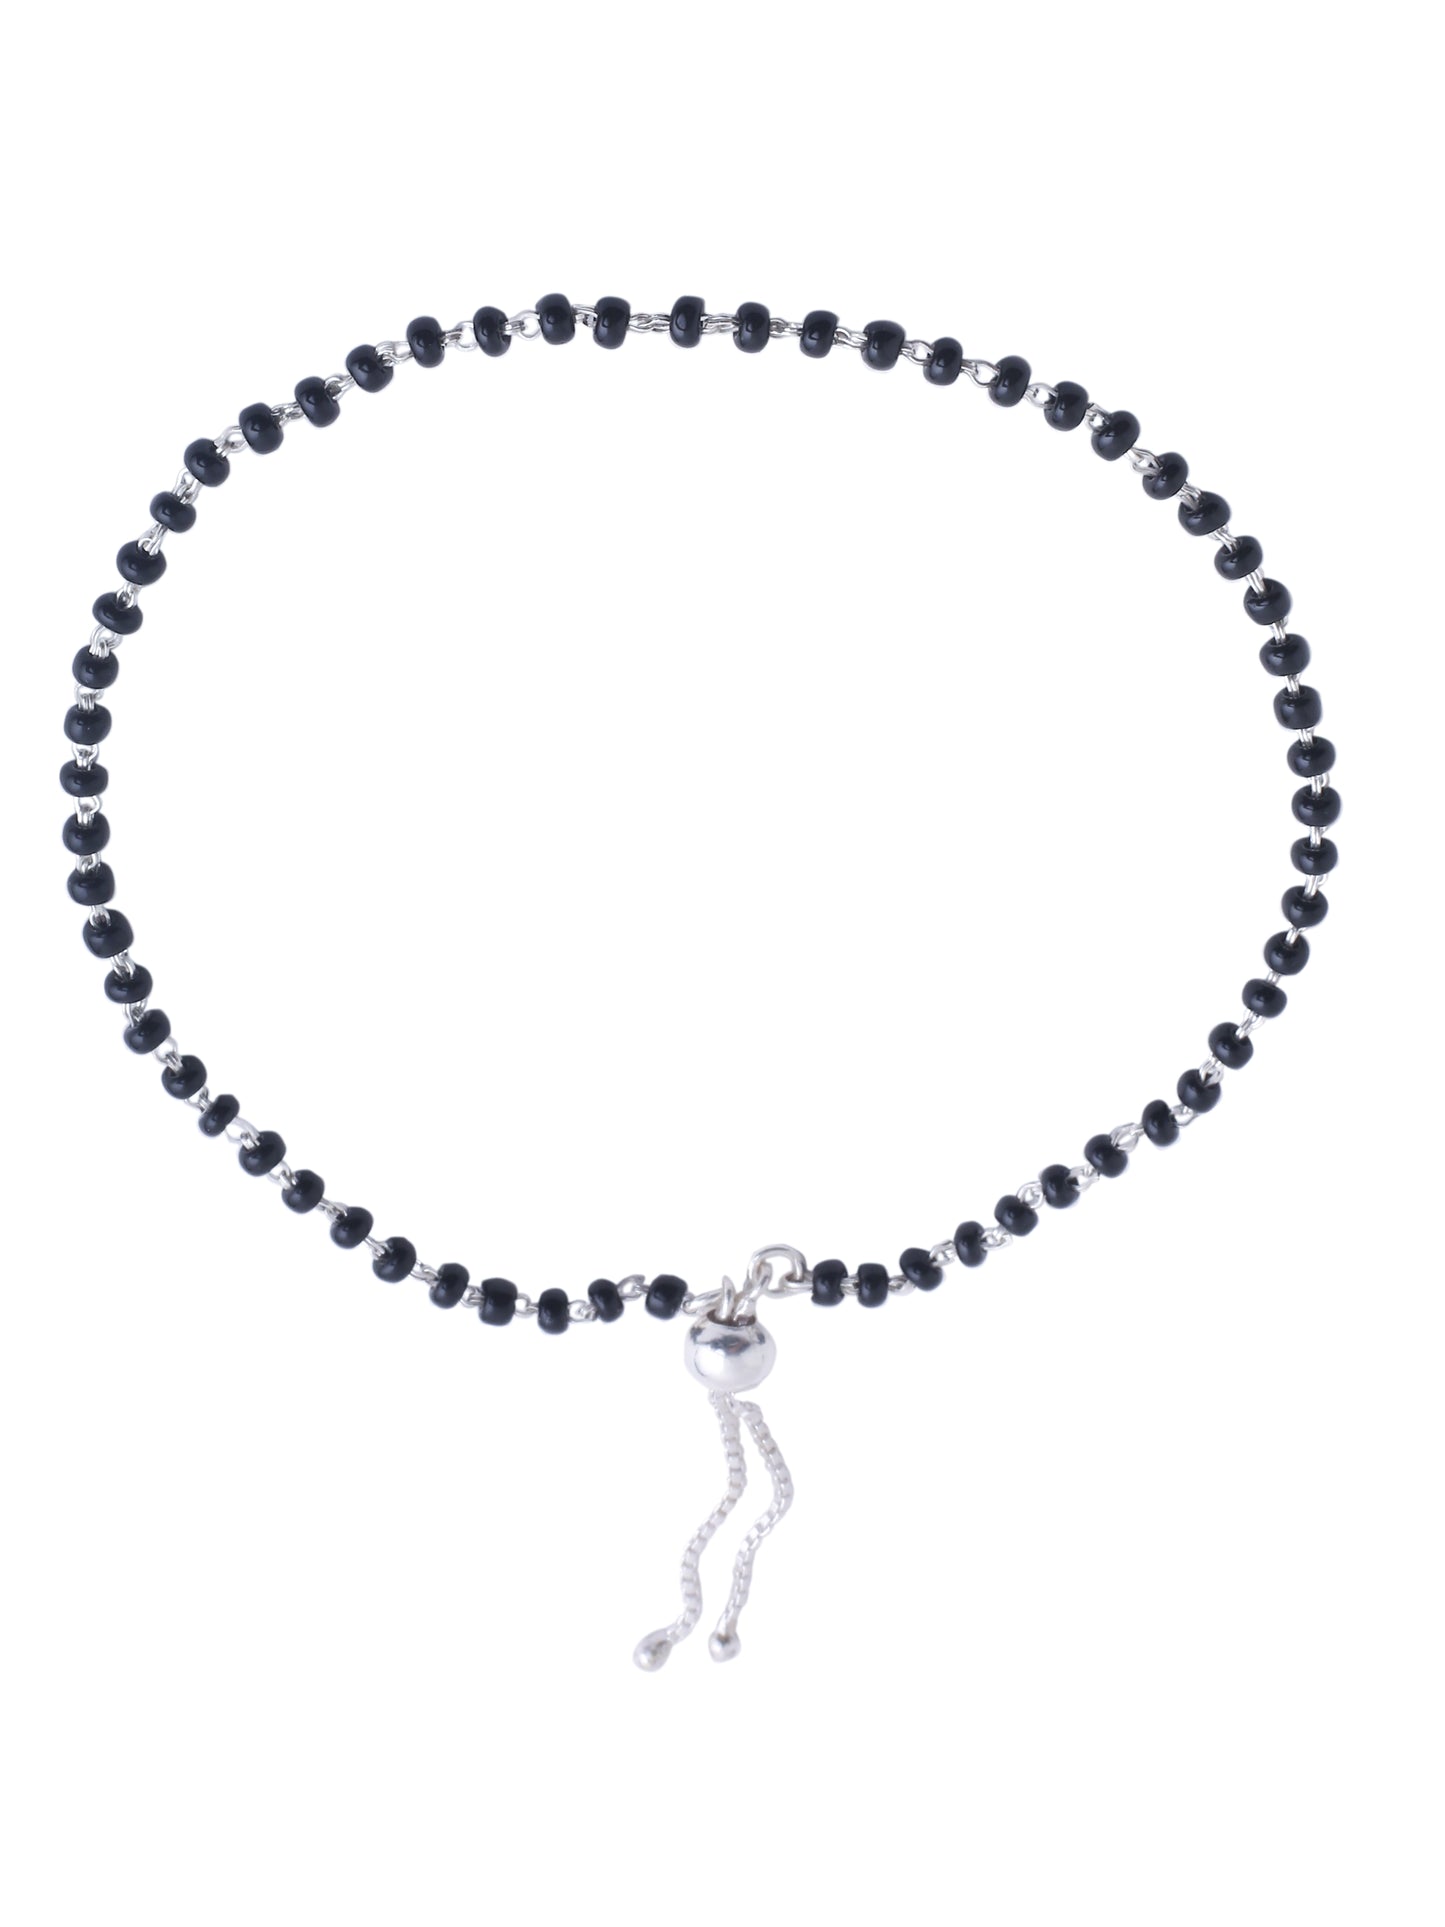 Black Beads Anklet in Sterling Silver